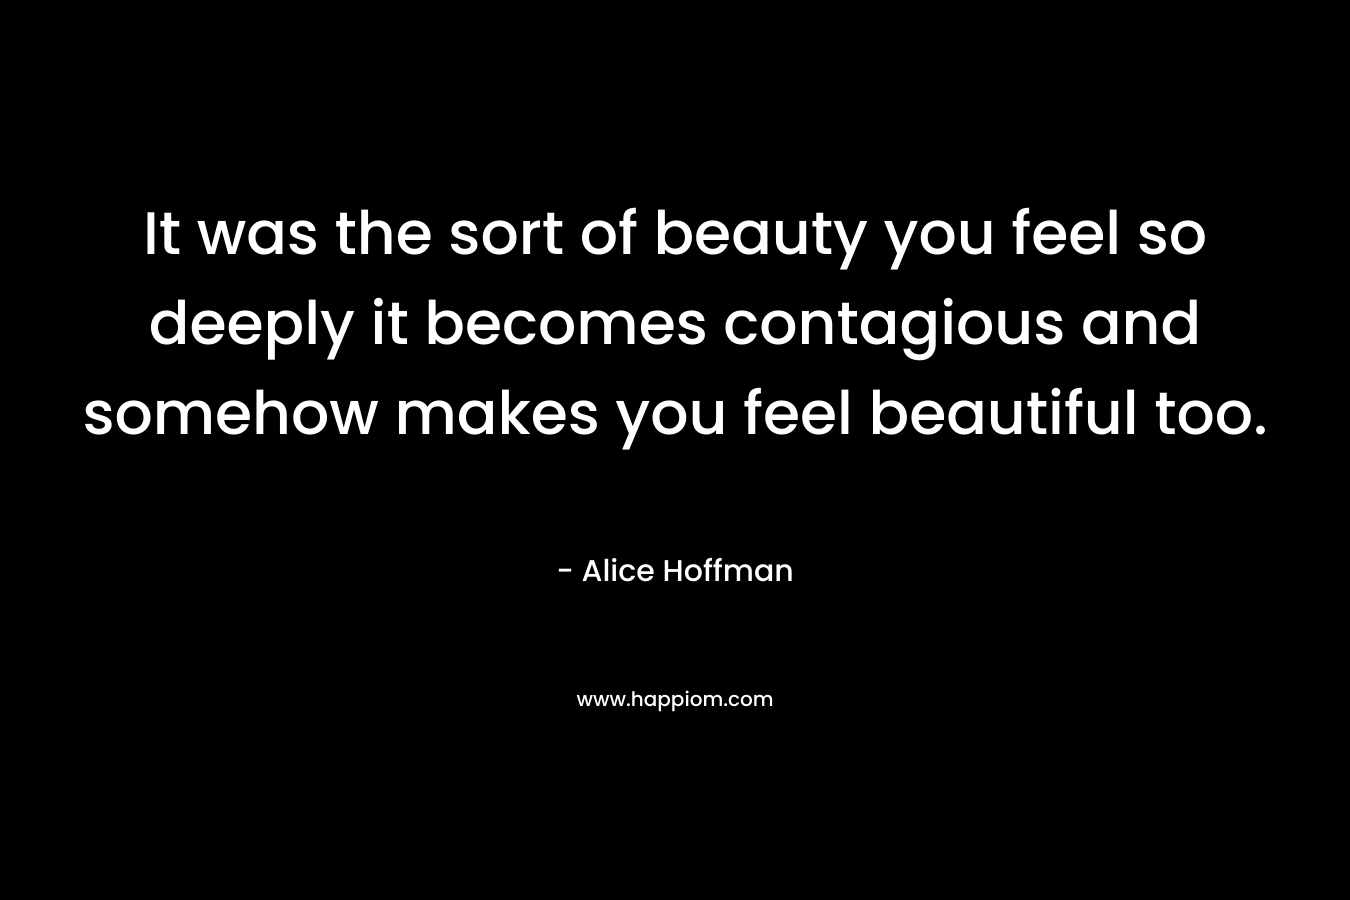 It was the sort of beauty you feel so deeply it becomes contagious and somehow makes you feel beautiful too.